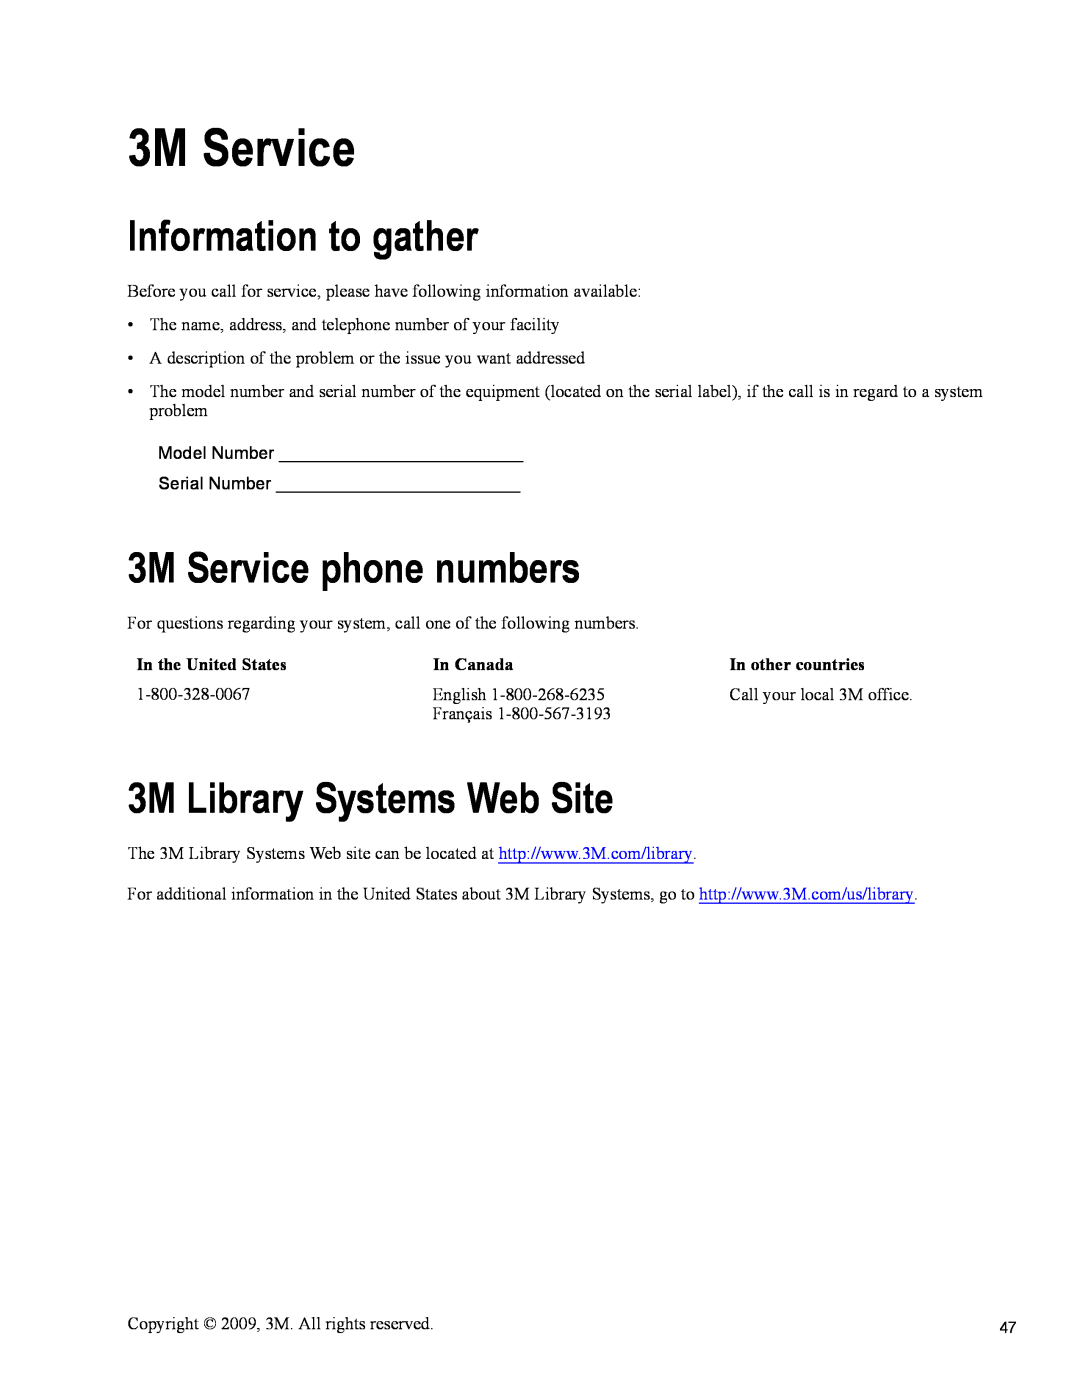 3M 813 Information to gather, 3M Service phone numbers, 3M Library Systems Web Site, In the United States, In Canada 